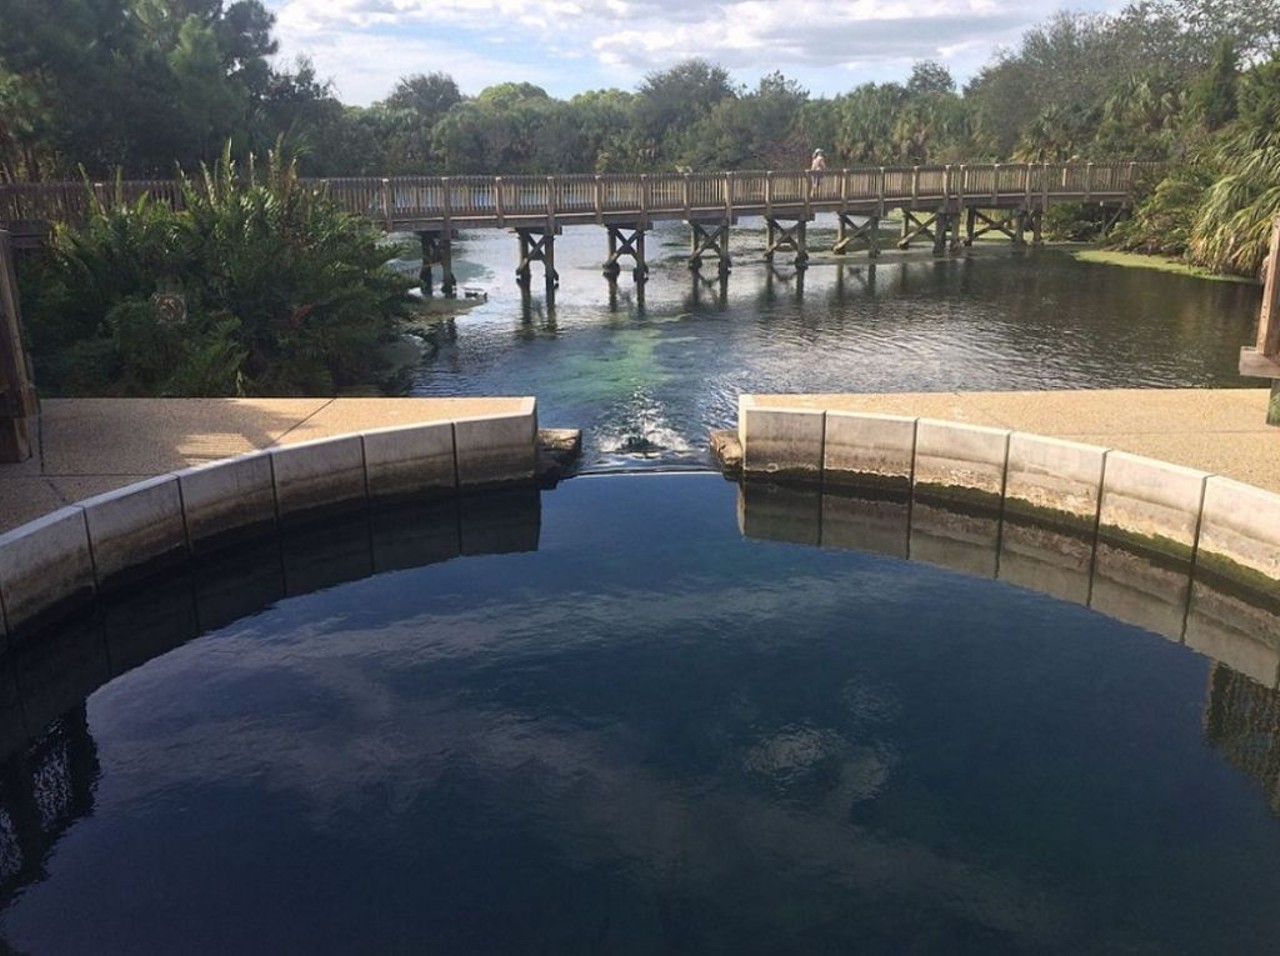 Wall Springs Park 
3725 De Soto Blvd., Palm Harbor
This spring was used as a spa twice throughout it&#146;s modern history, and if that doesn&#146;t just make you want to go relax in the water, nothing will.
Photo via Wall Springs Park/Wikimedia, Tlyle Shep3rd